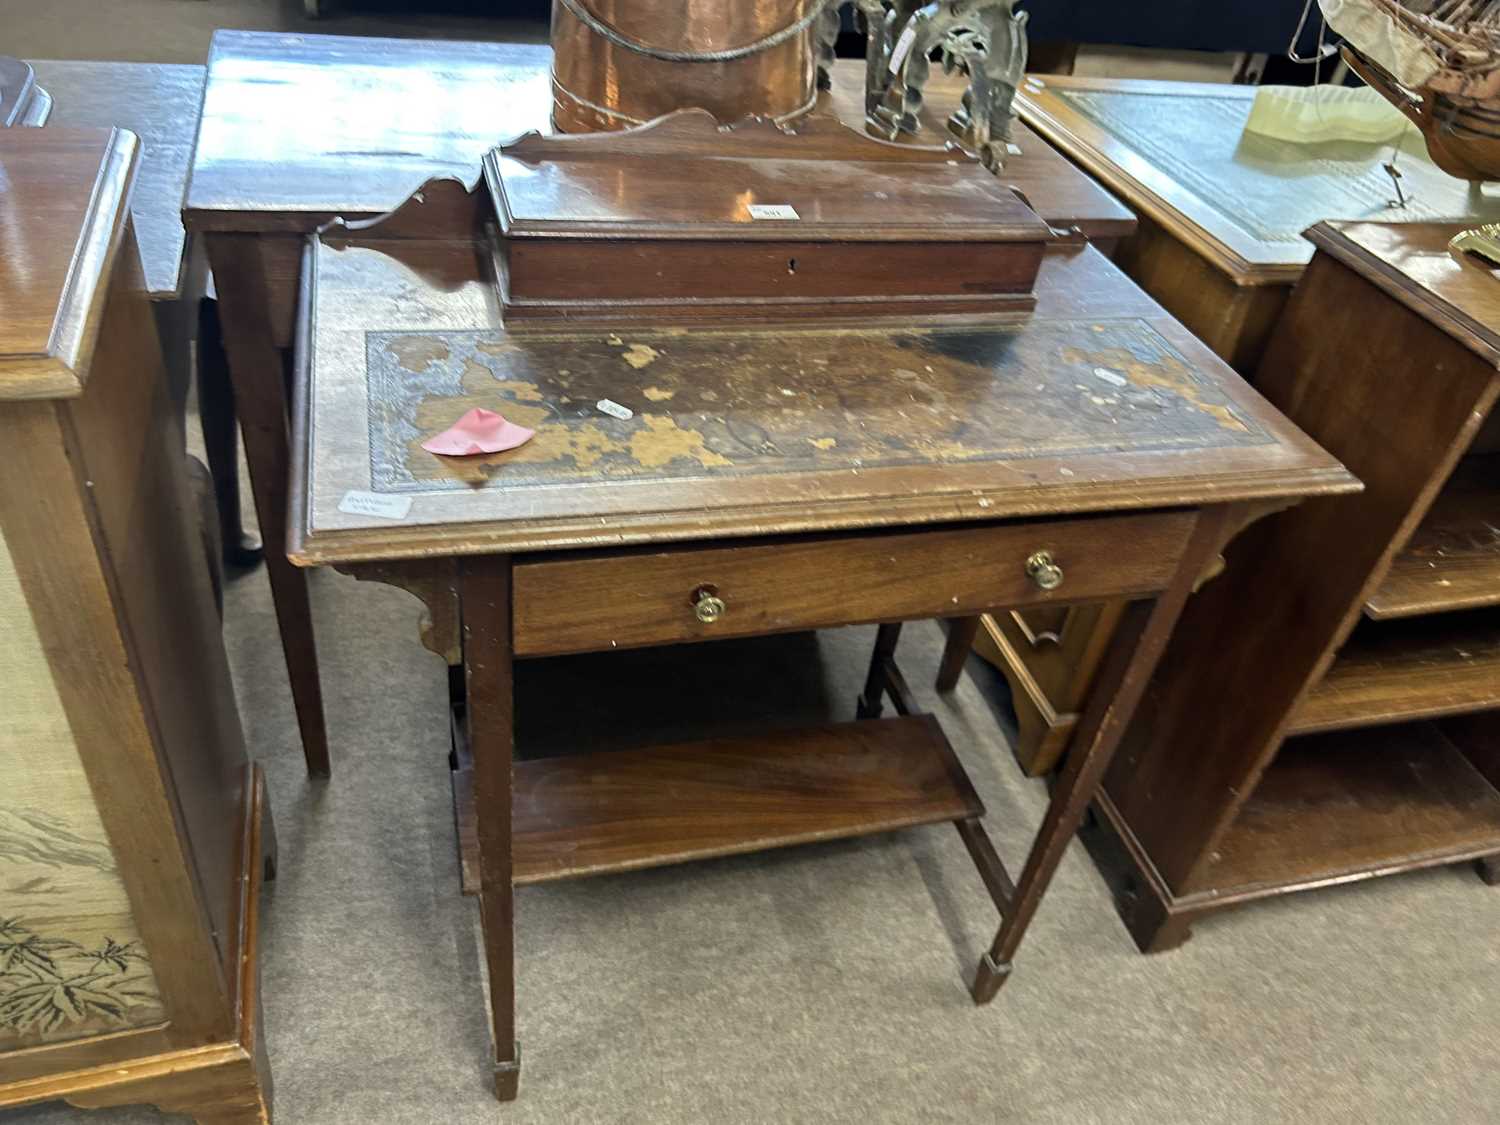 A small Edwardian writing table with a hinged storage compartment, worn leather writing surface